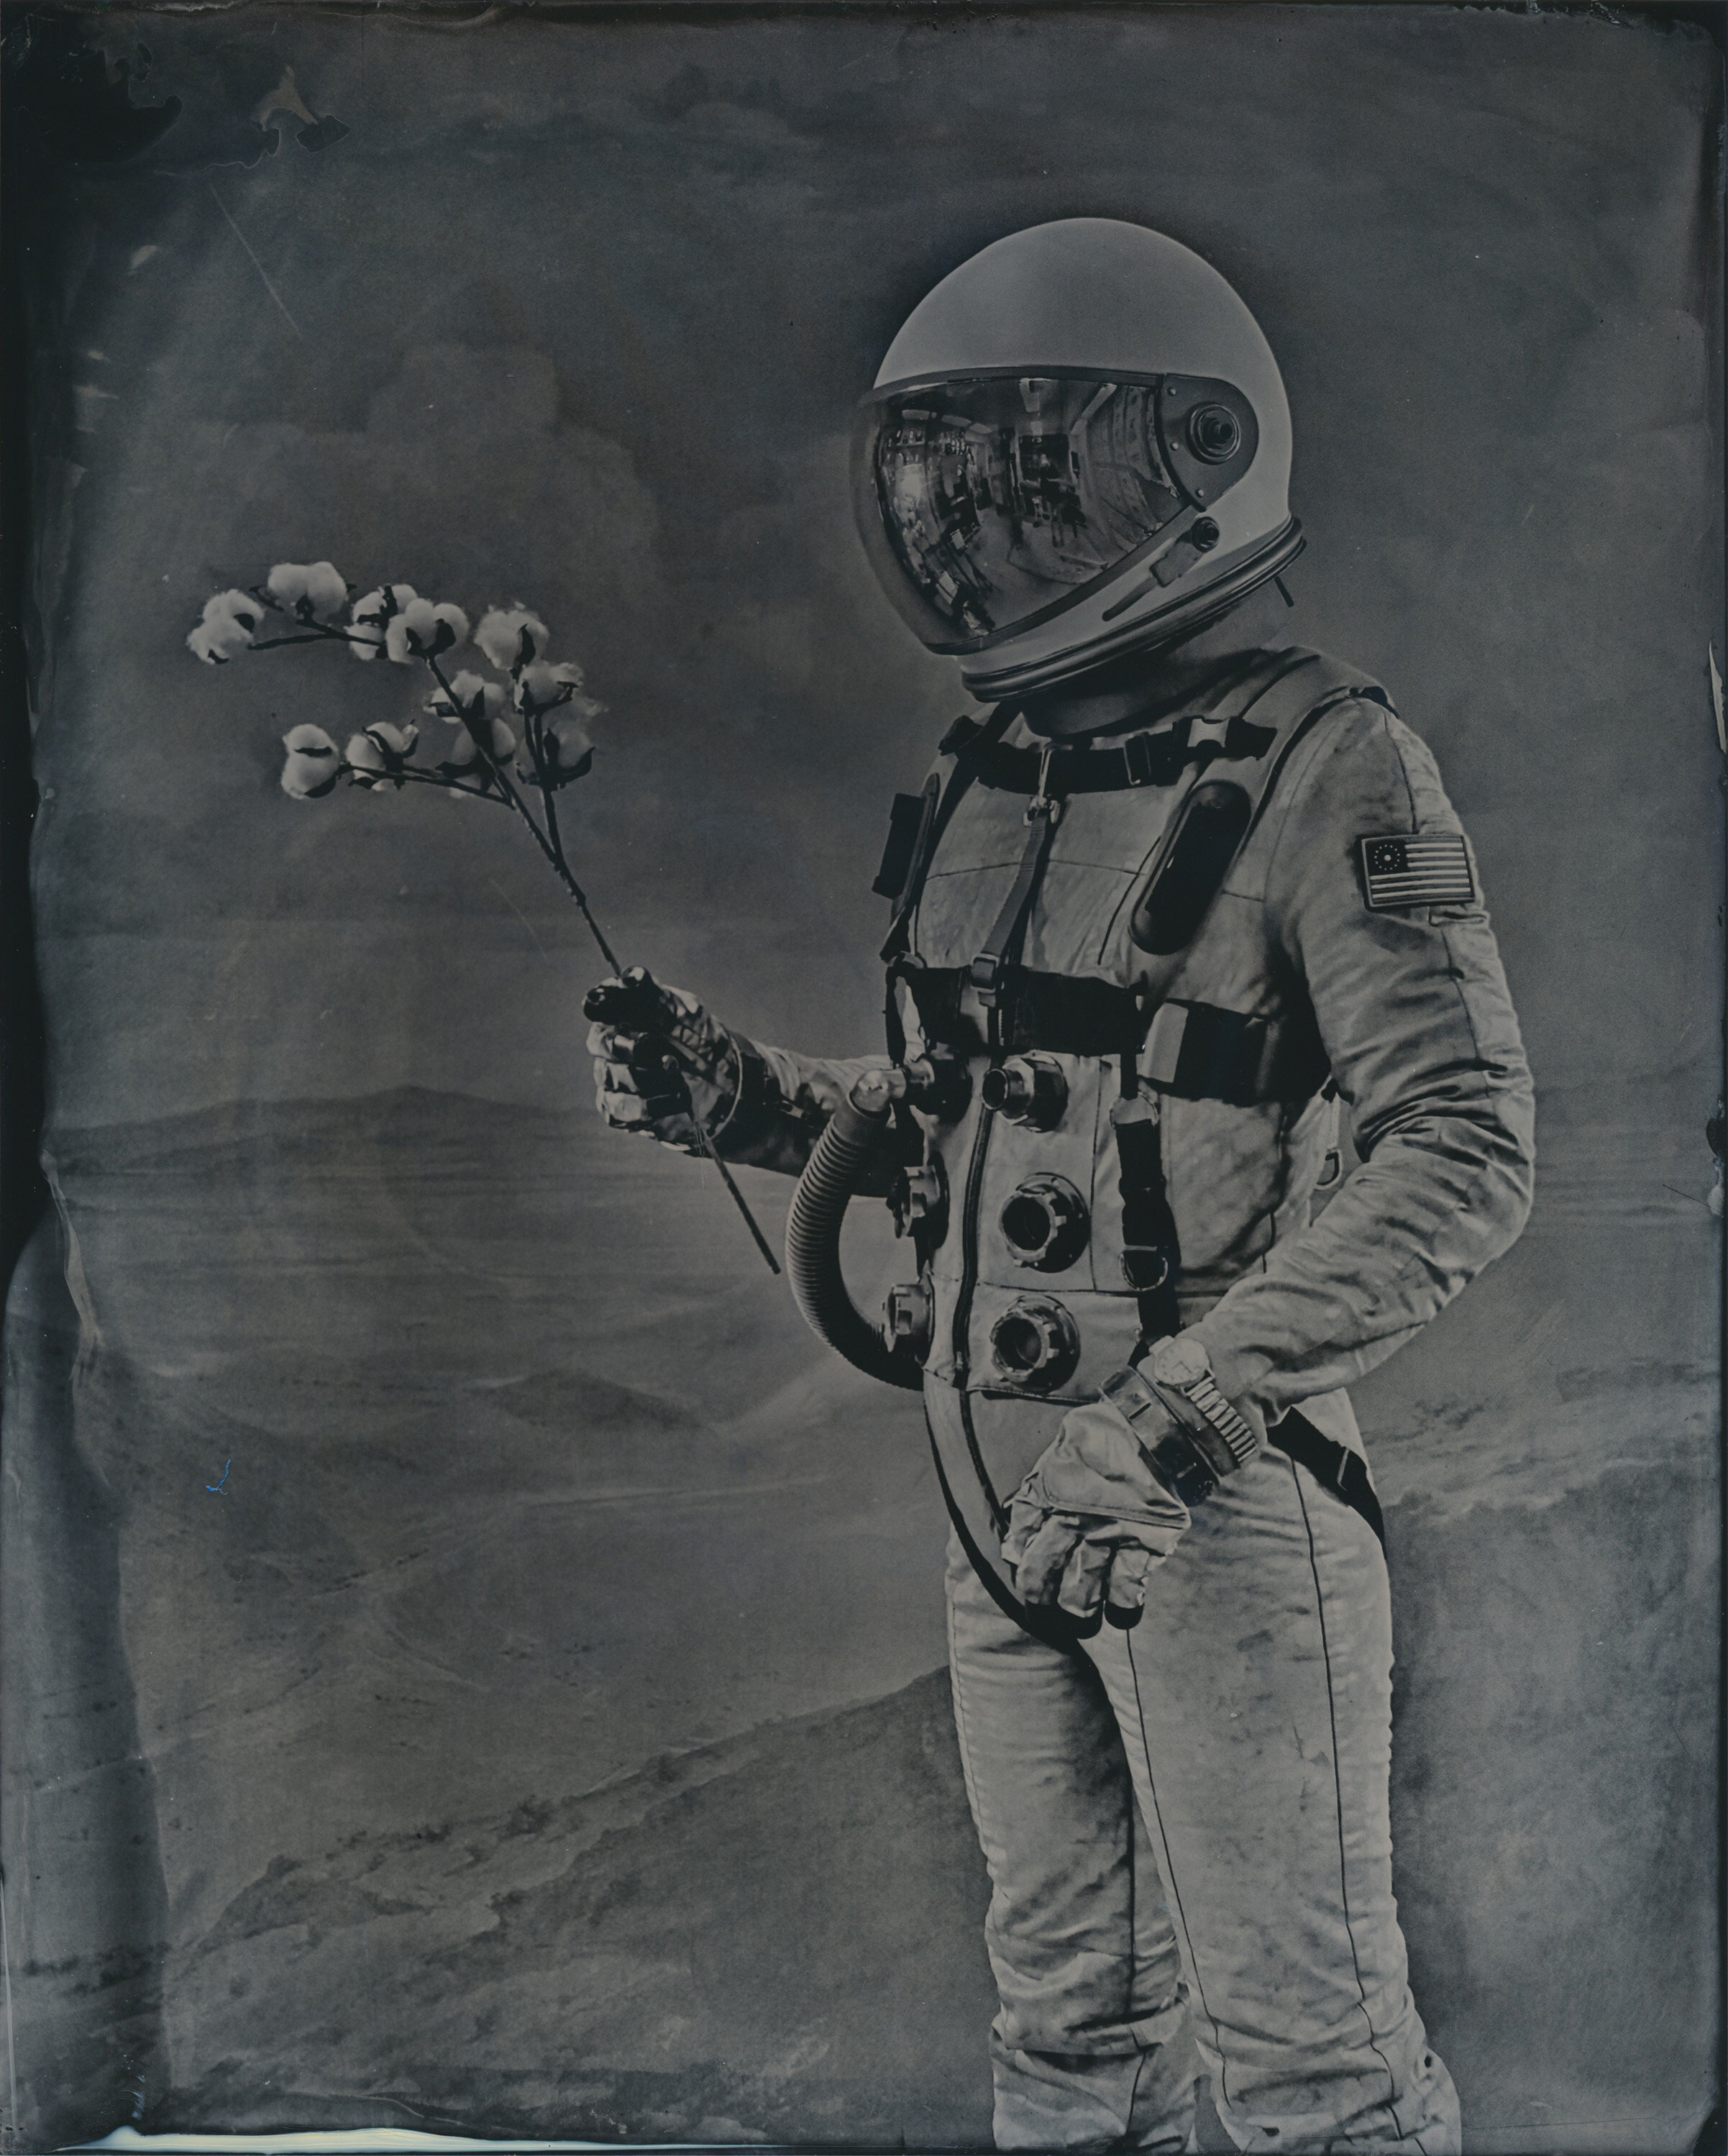   “Ace of Wands”   2021  Wet Plate Collodion  8x10   